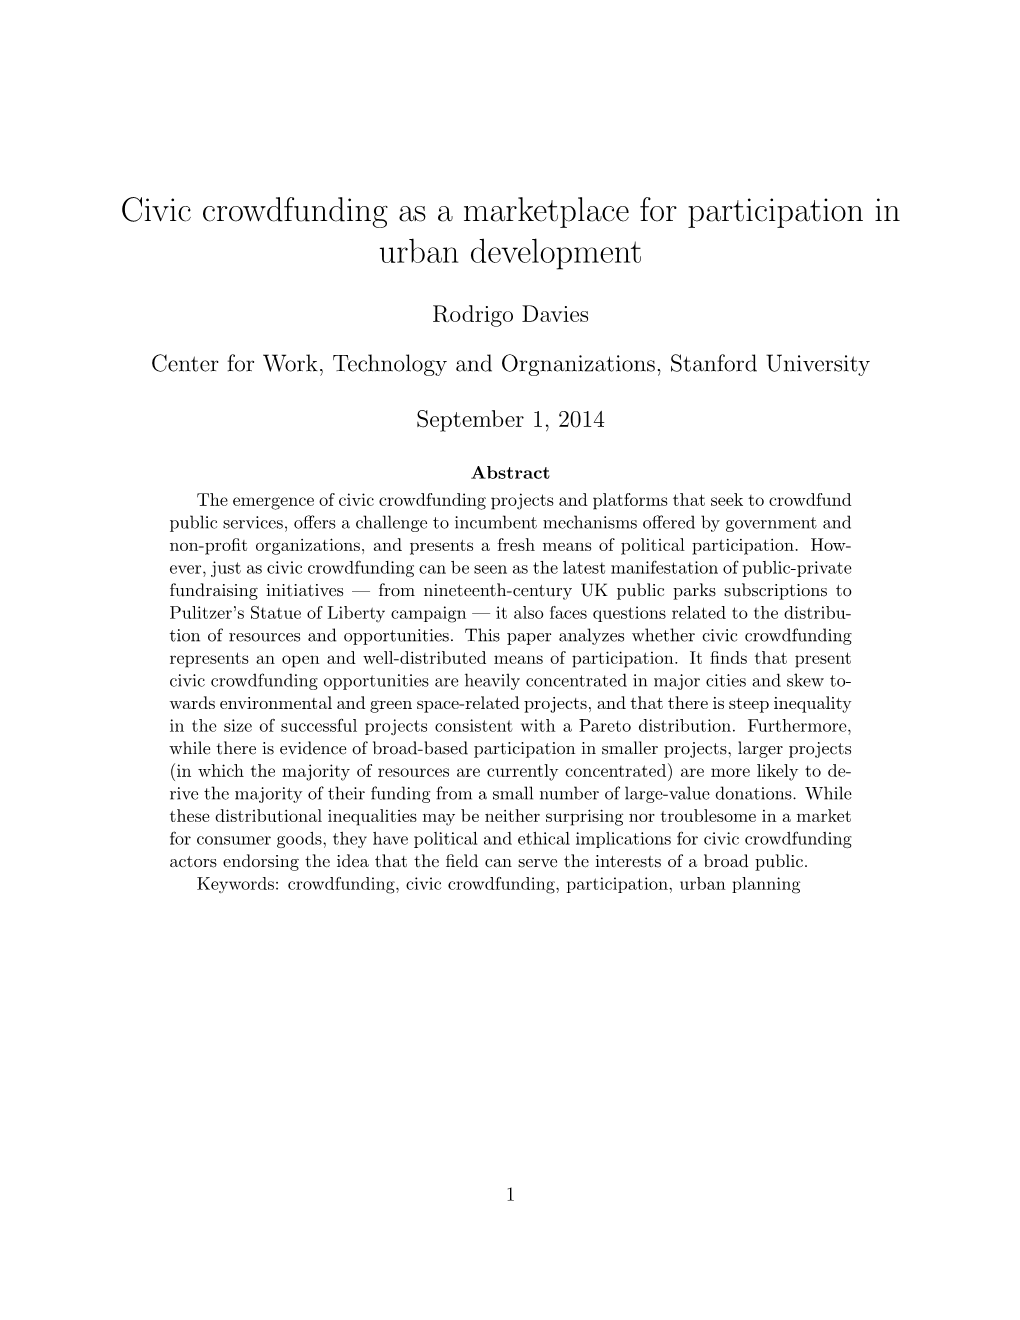 Civic Crowdfunding As a Marketplace for Participation in Urban Development